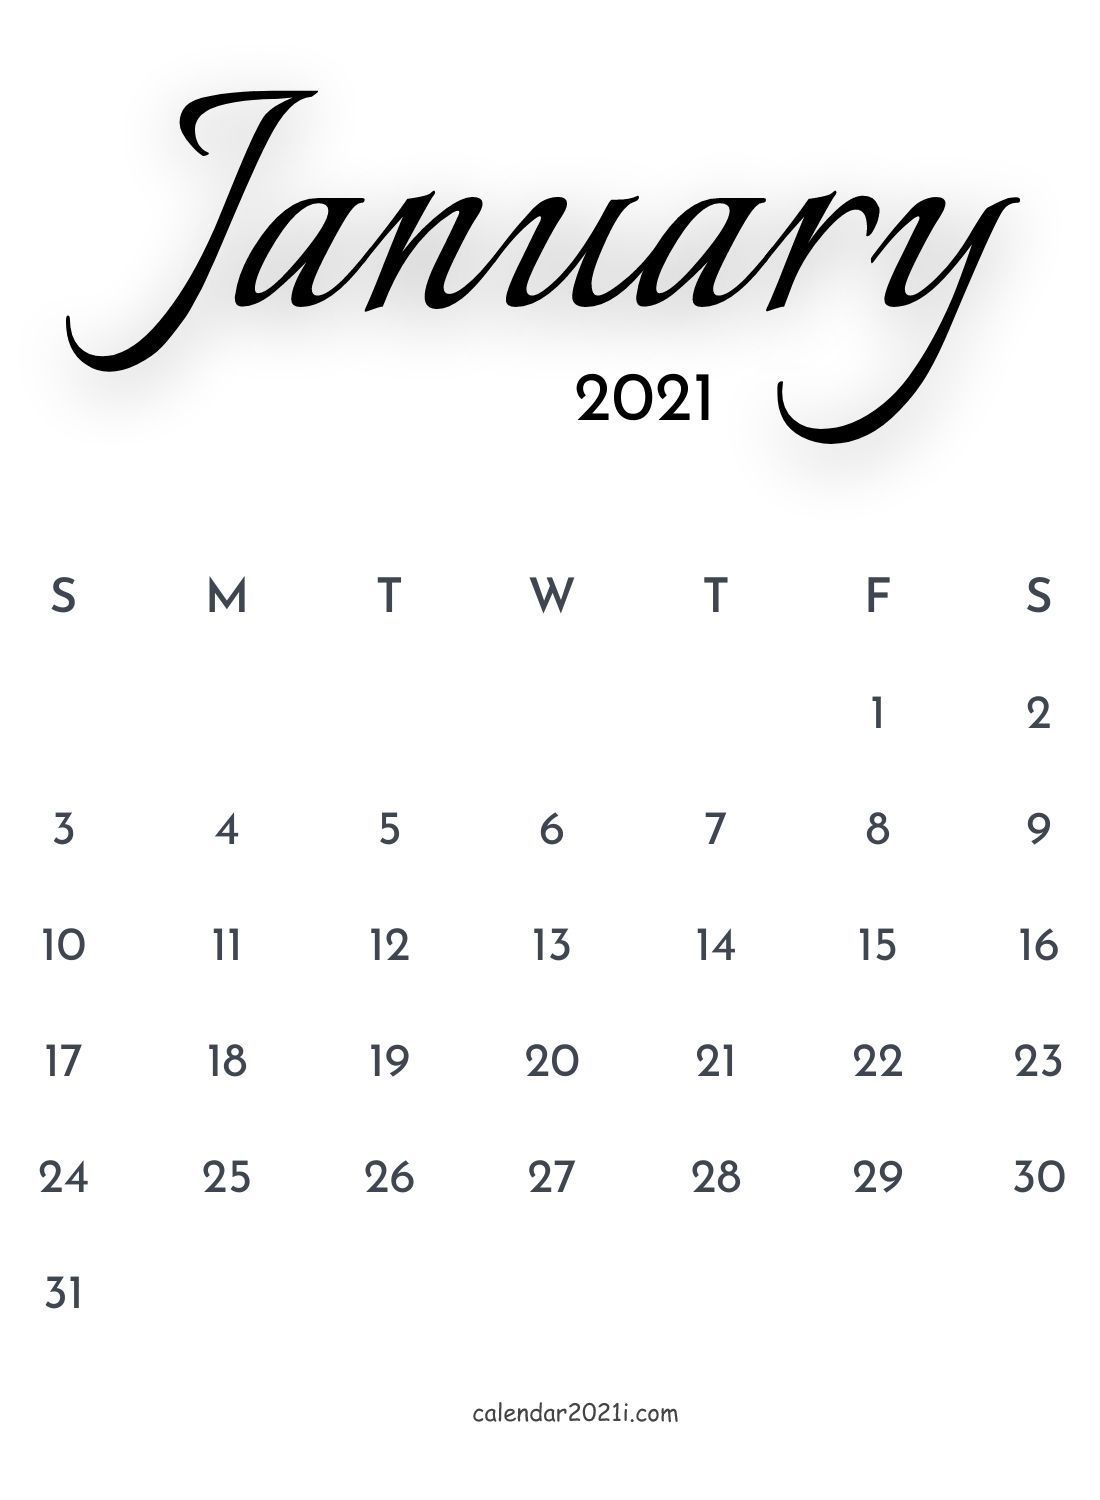 January 2021 Calligraphy Calendar Free Download